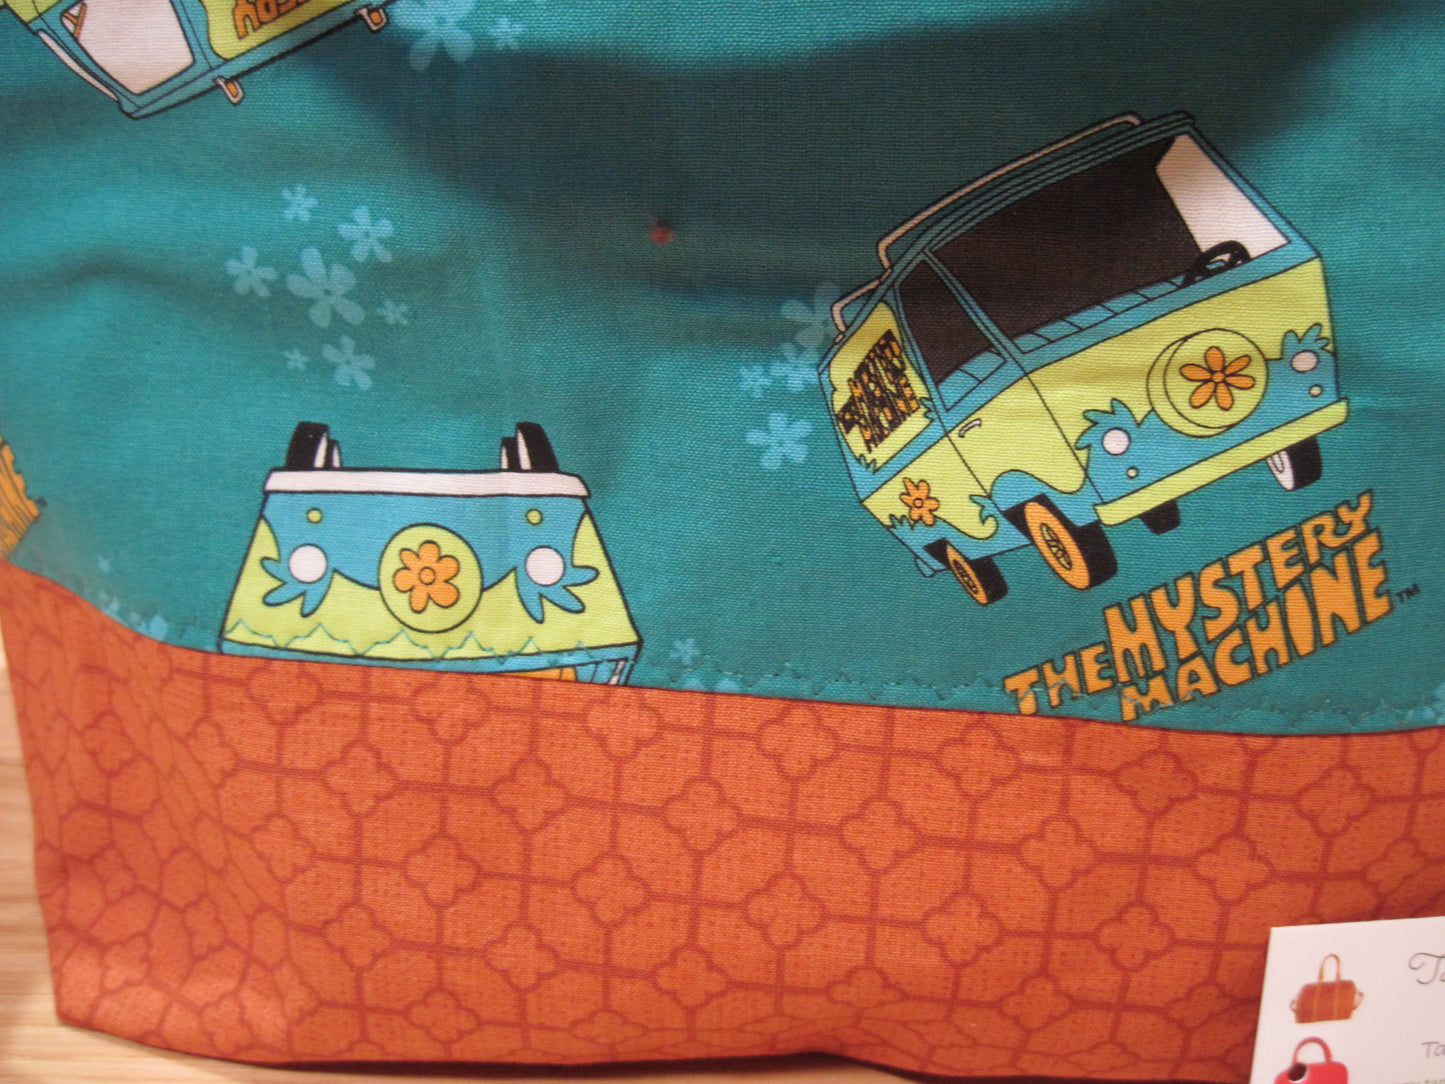 X-Large Tote Style Bag ~ Scooby Doo Mystery Machine ~ w/ sewn handles